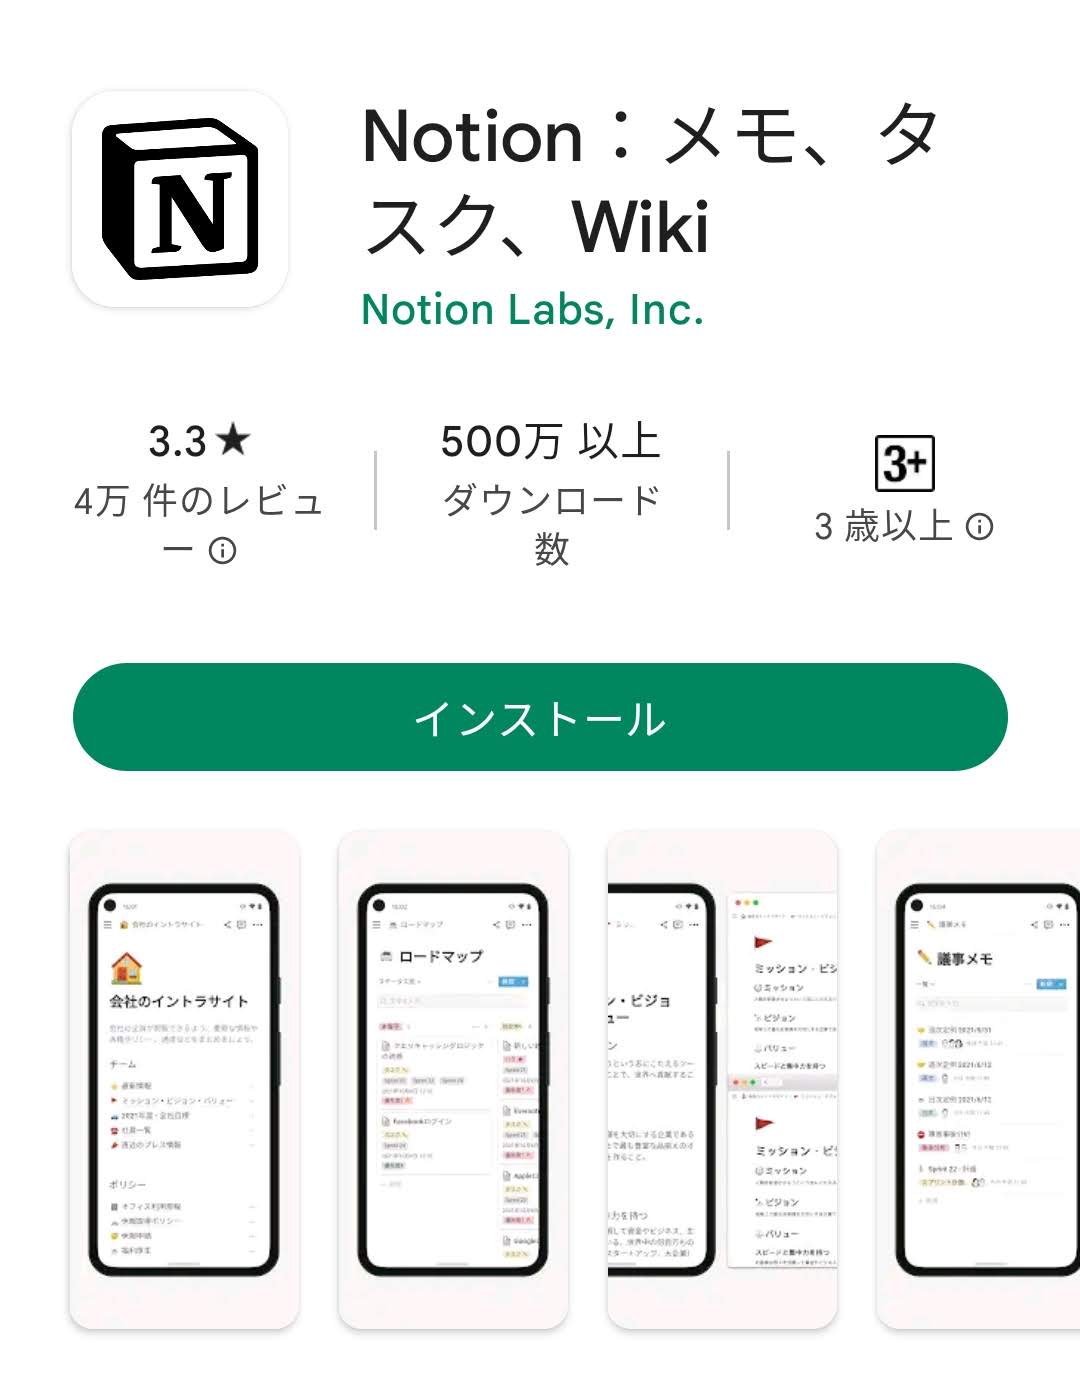 2.Androidの場合